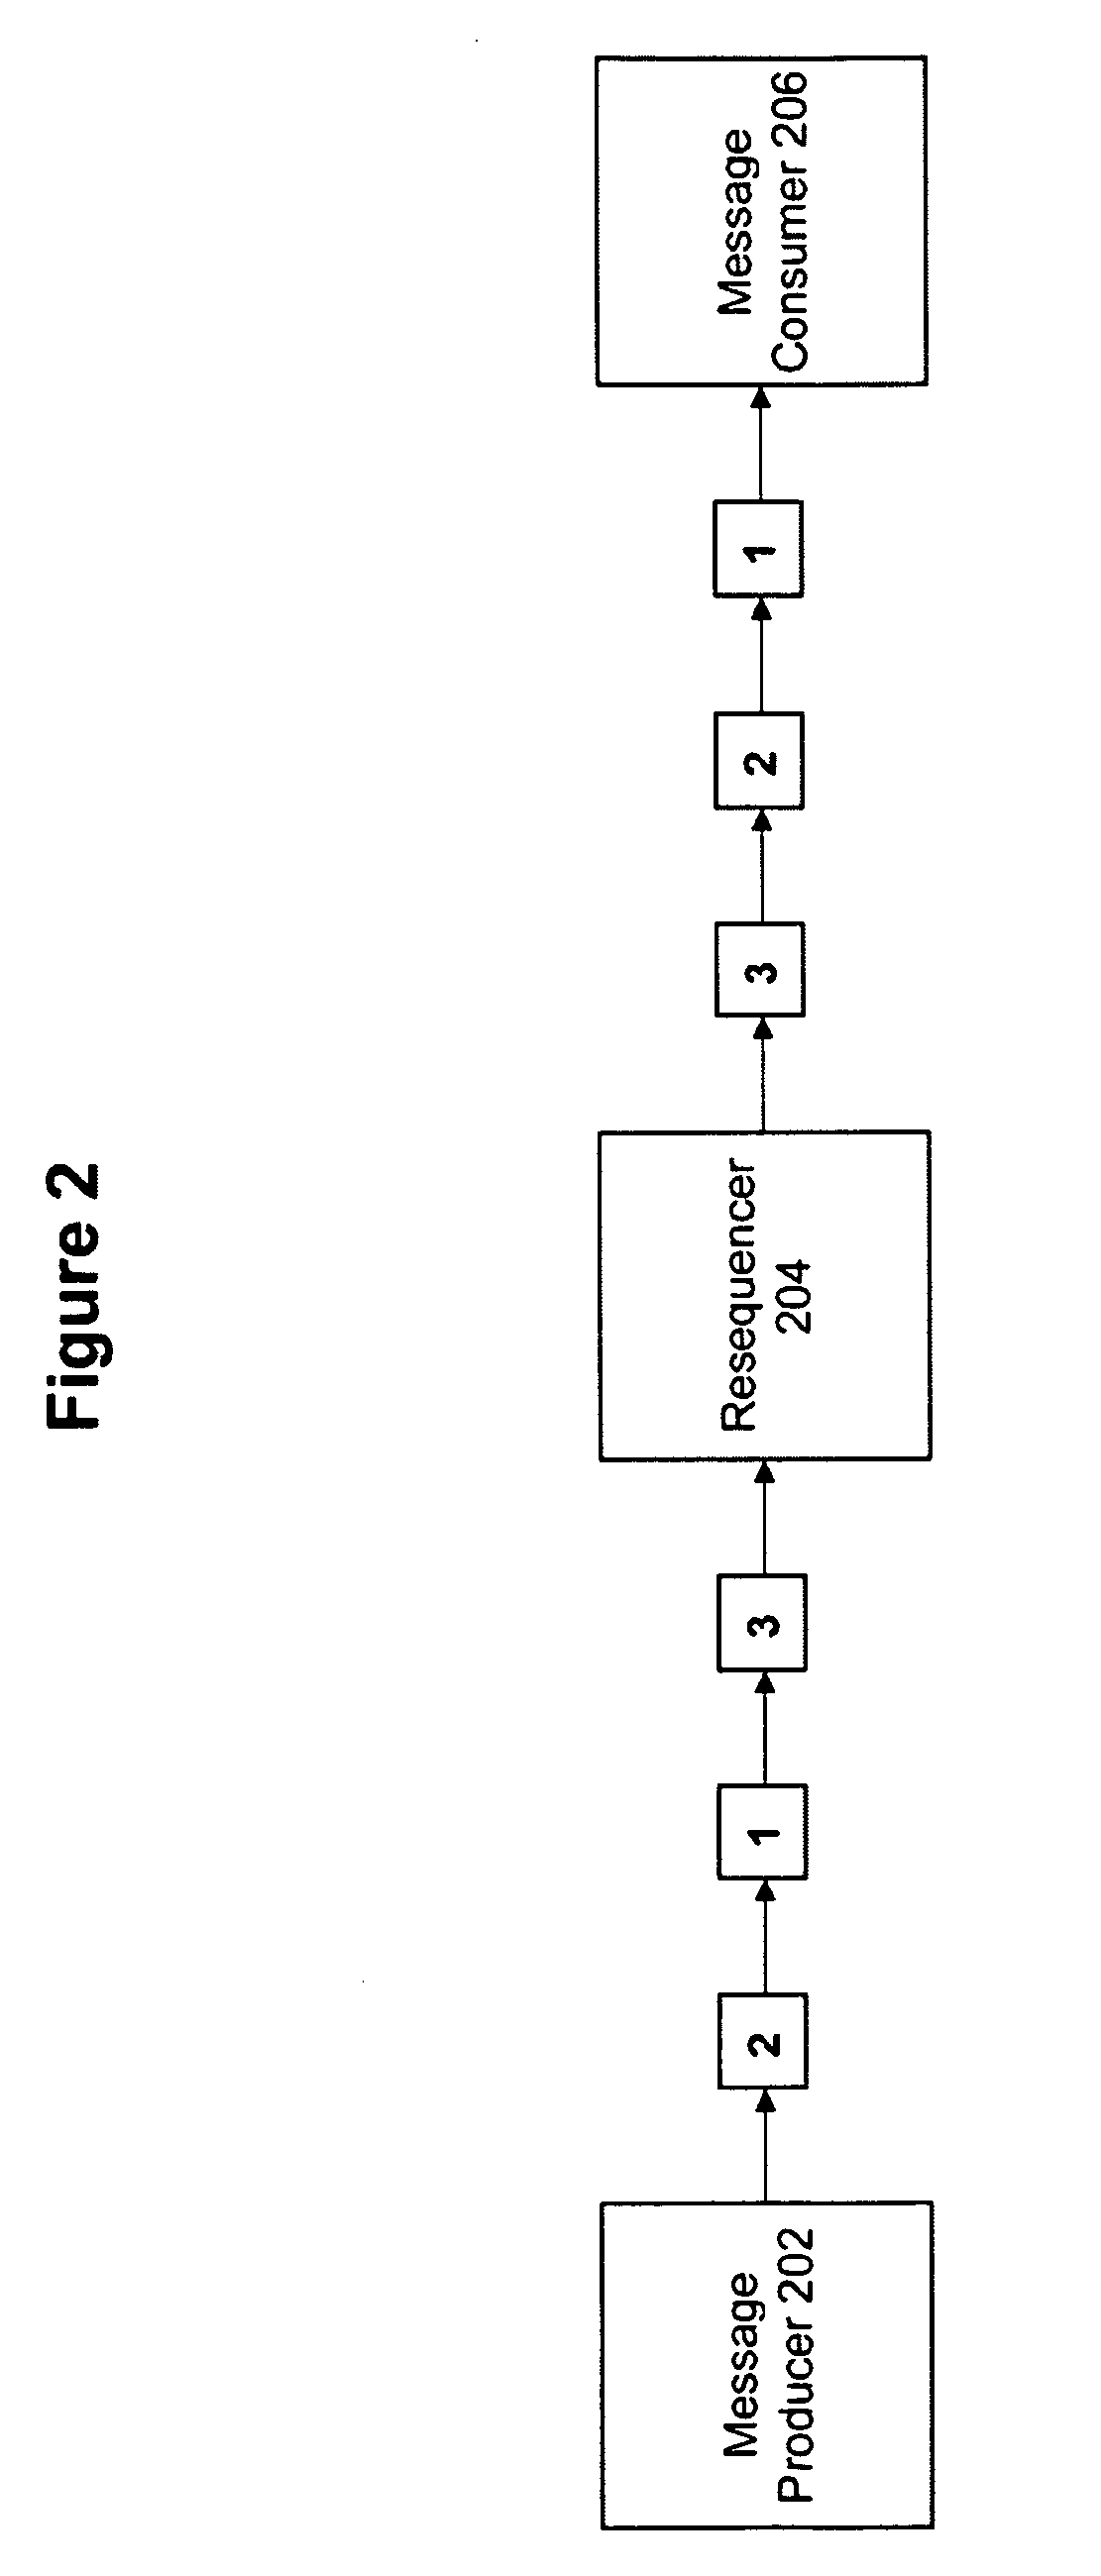 Method and system for implementing sequence start and increment values for a resequencer